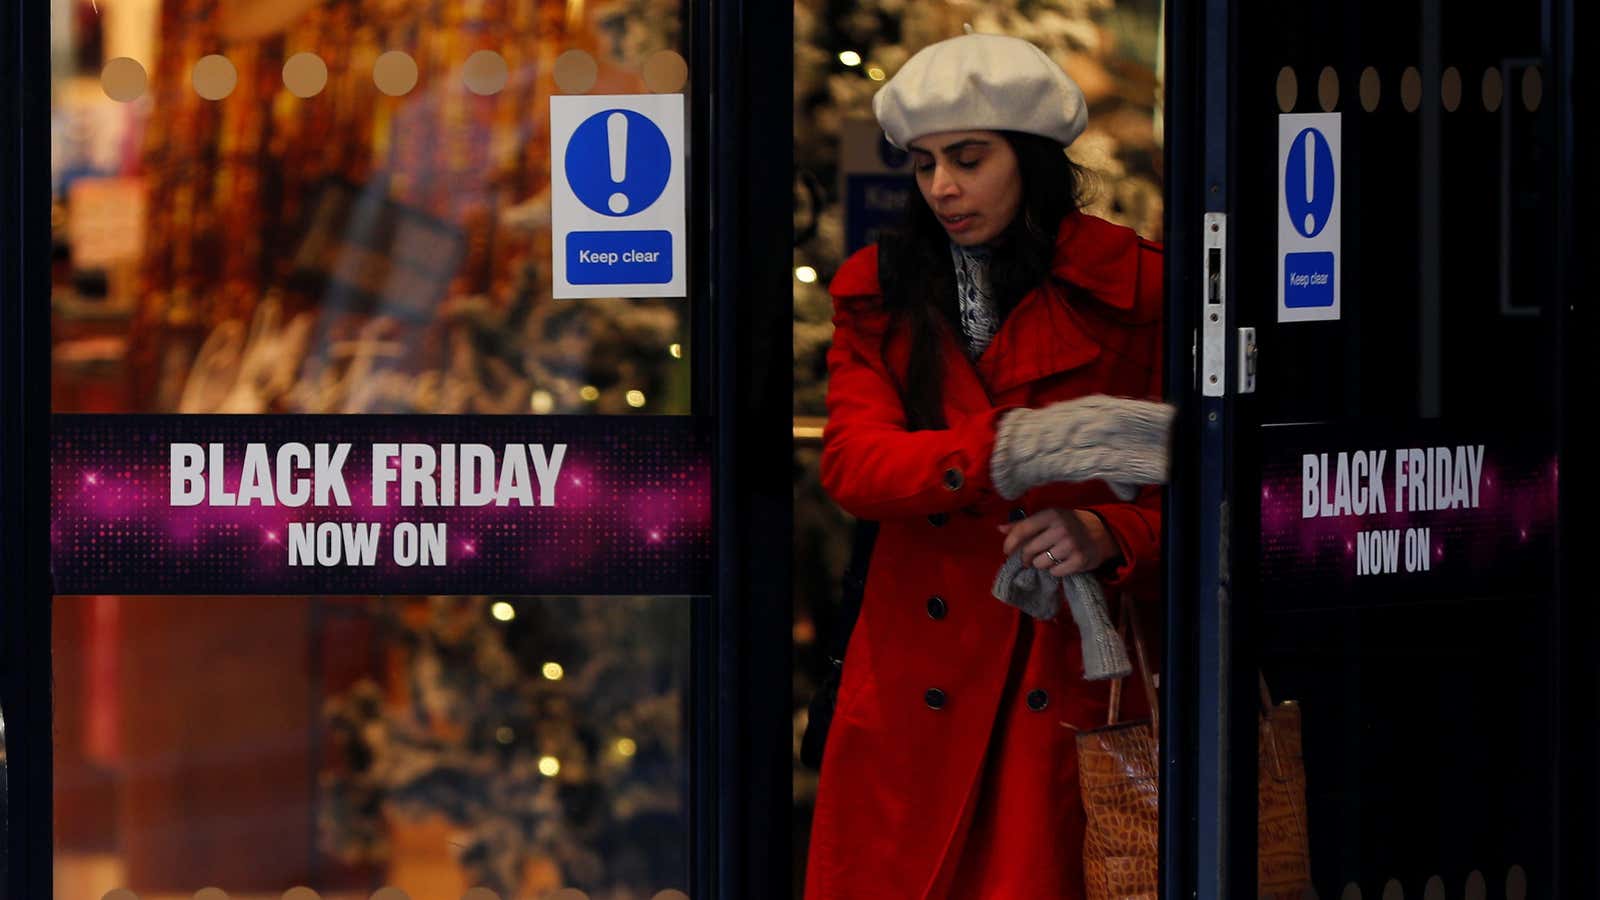 A UK store advertises a Black Friday sale on Nov. 22, a week before actual Black Friday.